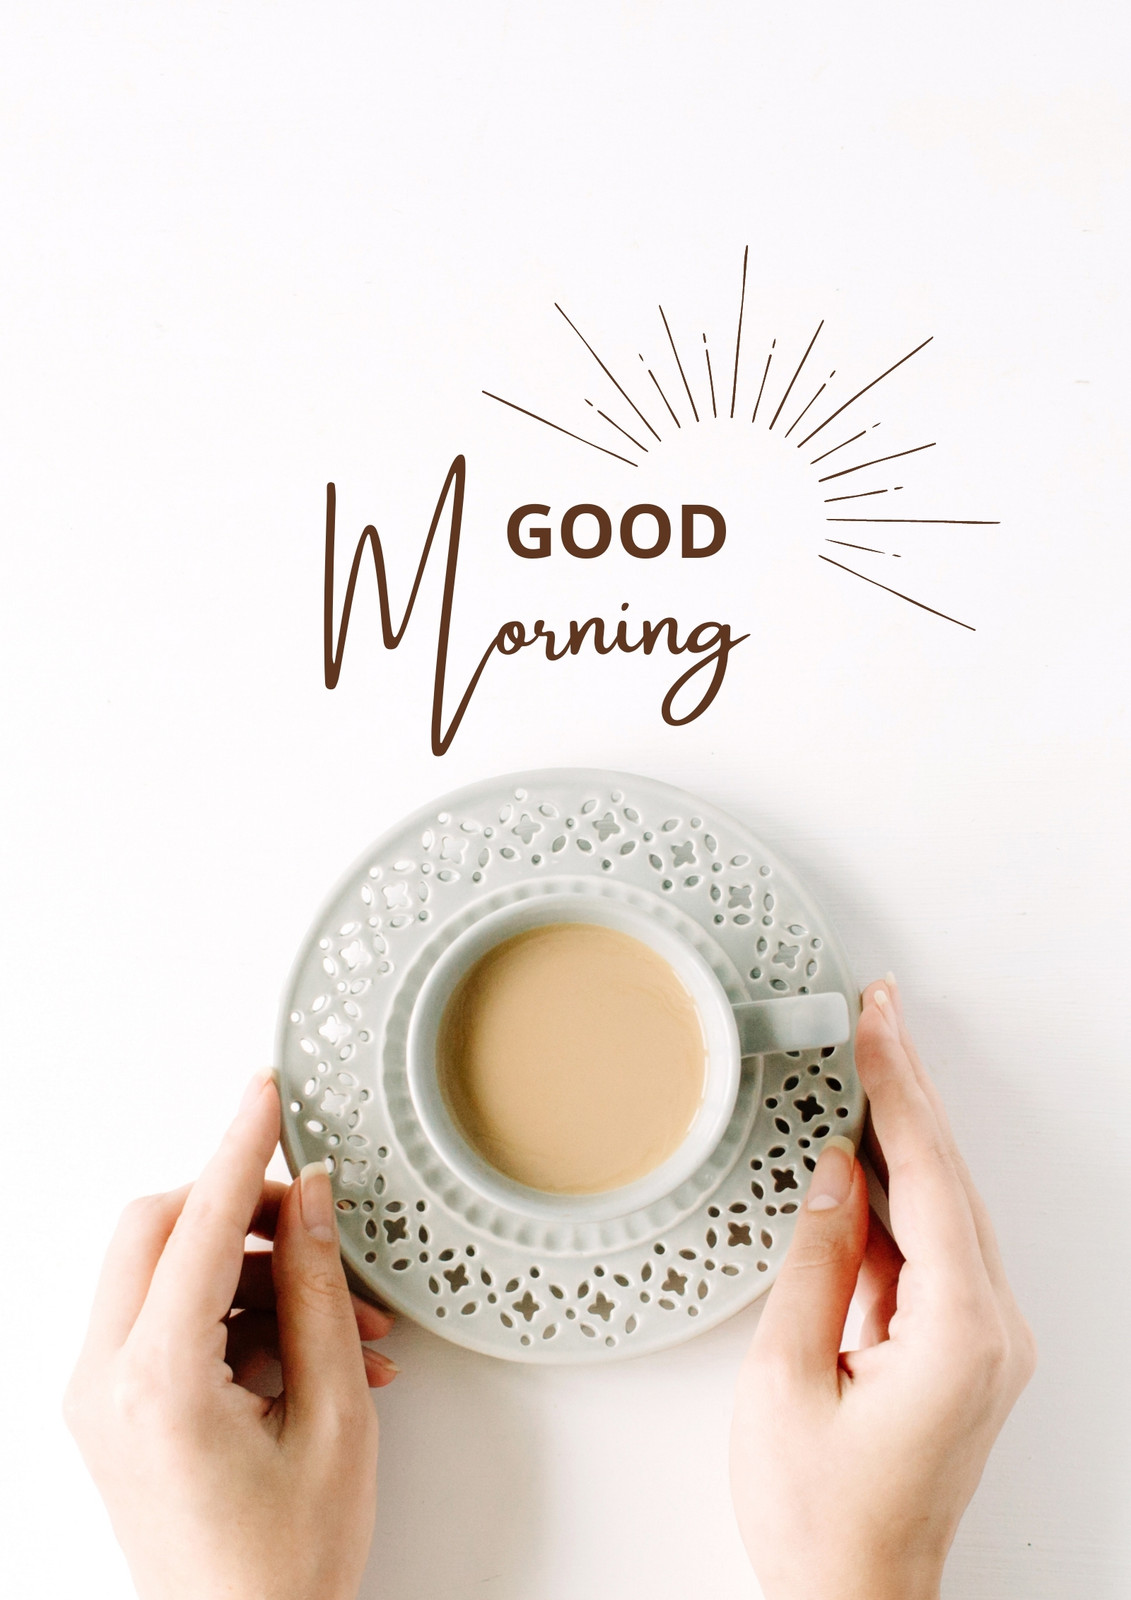 Page 11 - Free and customizable good morning wallpaper templates